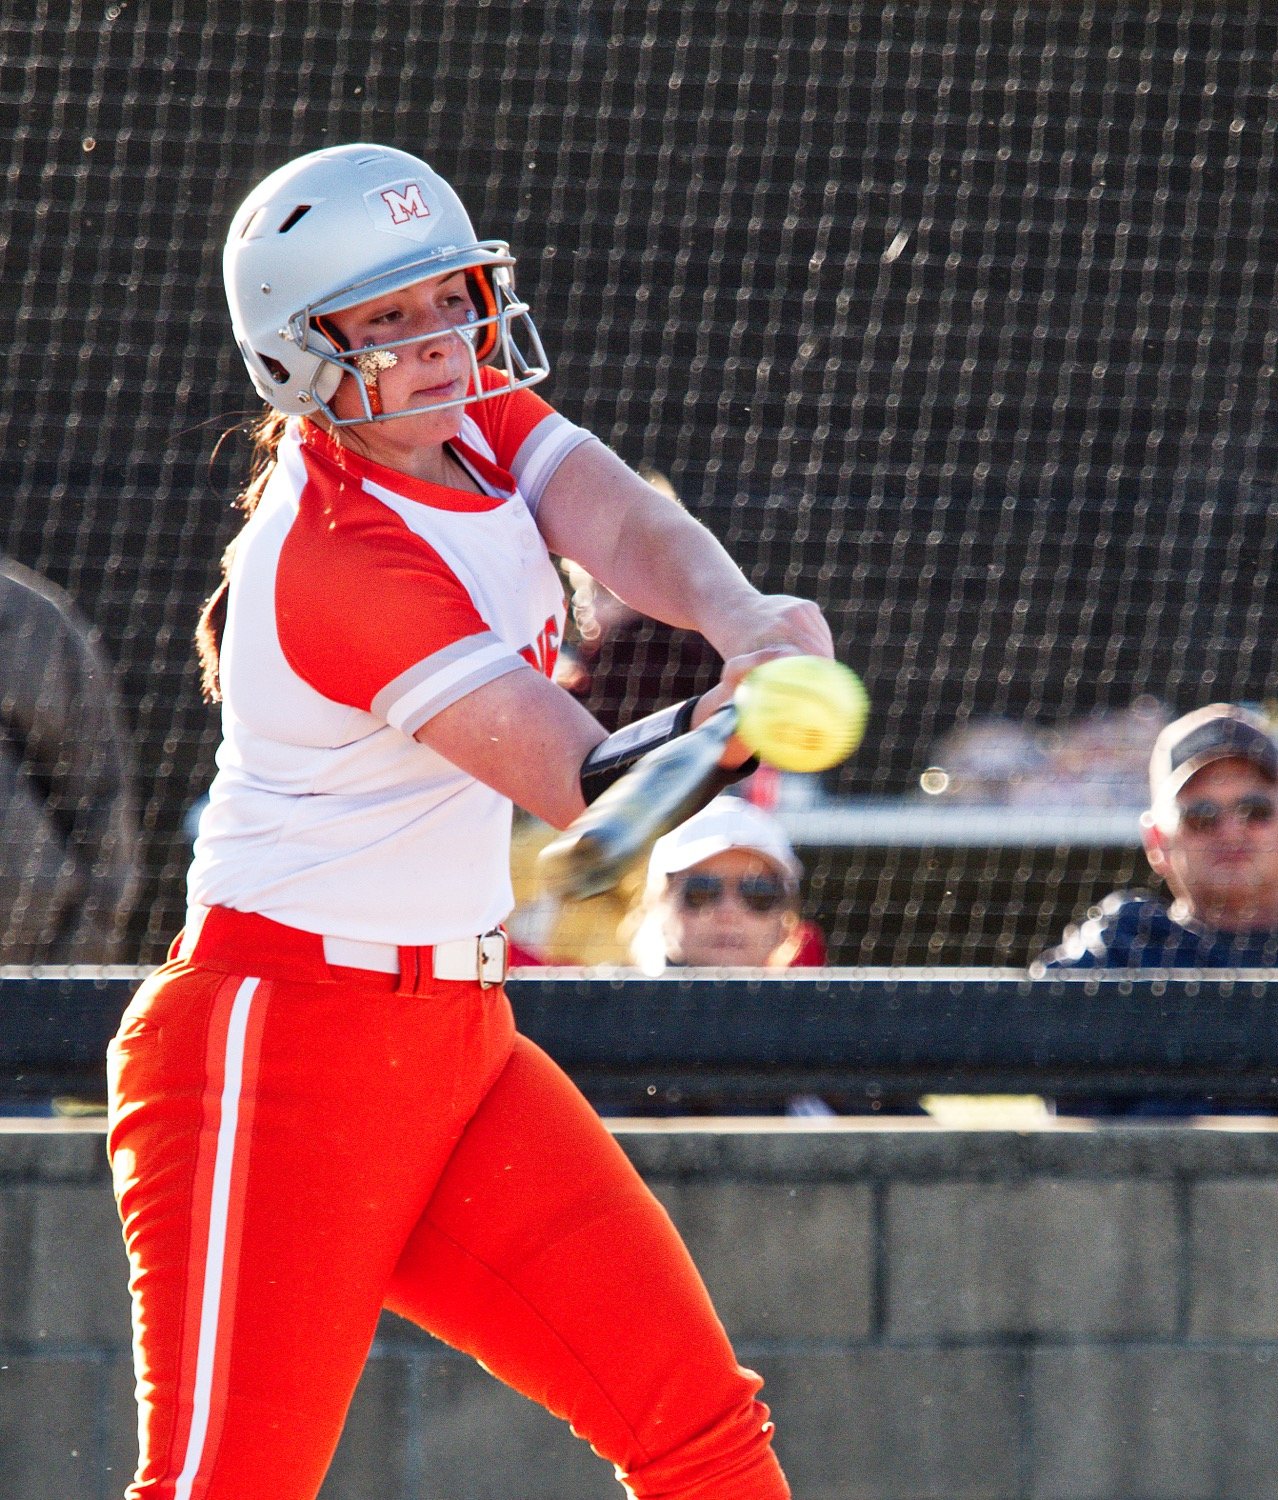 Audrey Dowdle connects with the ball on her way to a three-hit, four-RBI evening at the plate. [see more hits]